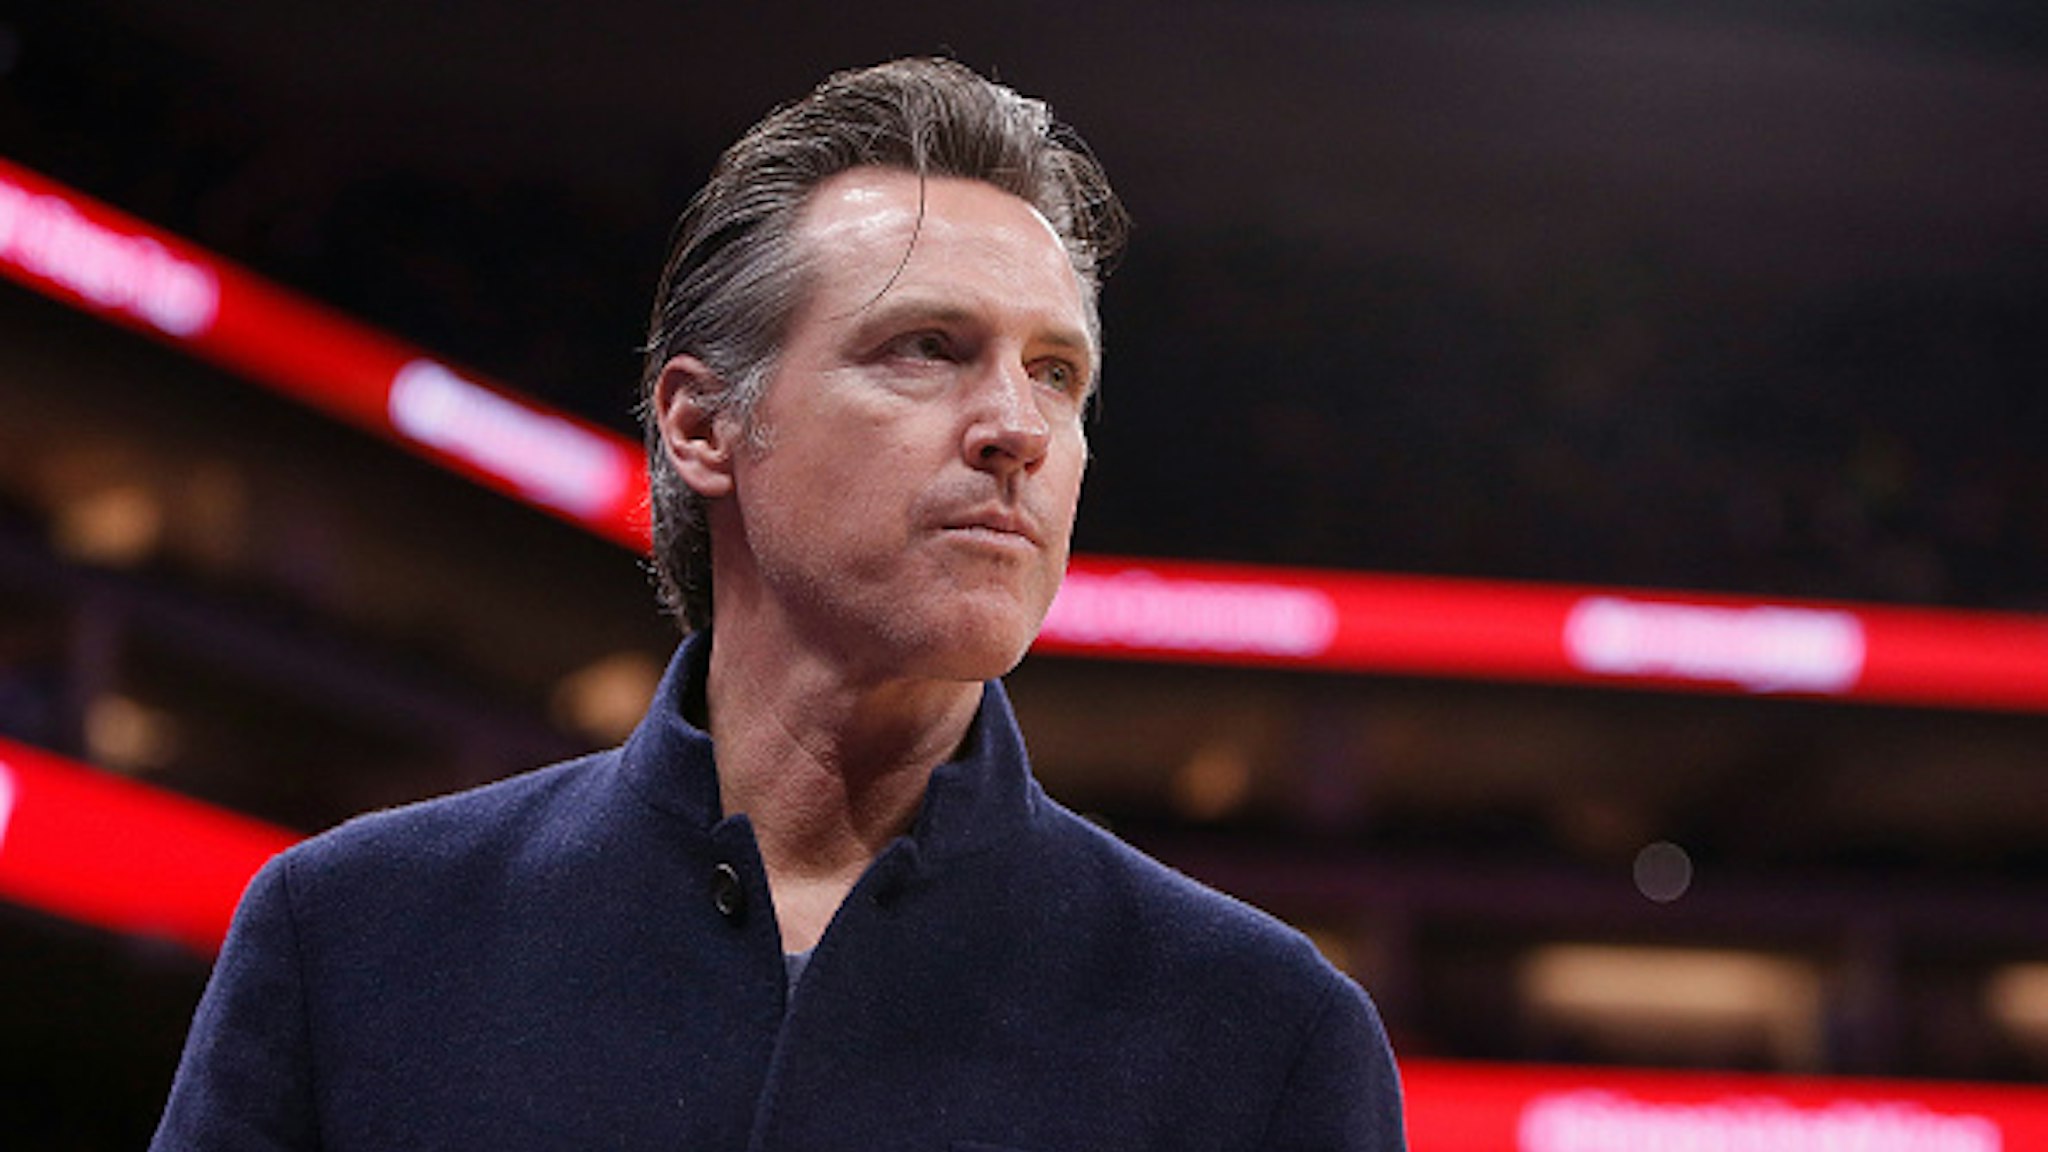 Governor of California Gavin Newsom looks on during the game between the Chicago Bulls and the Sacramento Kings at Golden 1 Center on March 17, 2019 in Sacramento, California.